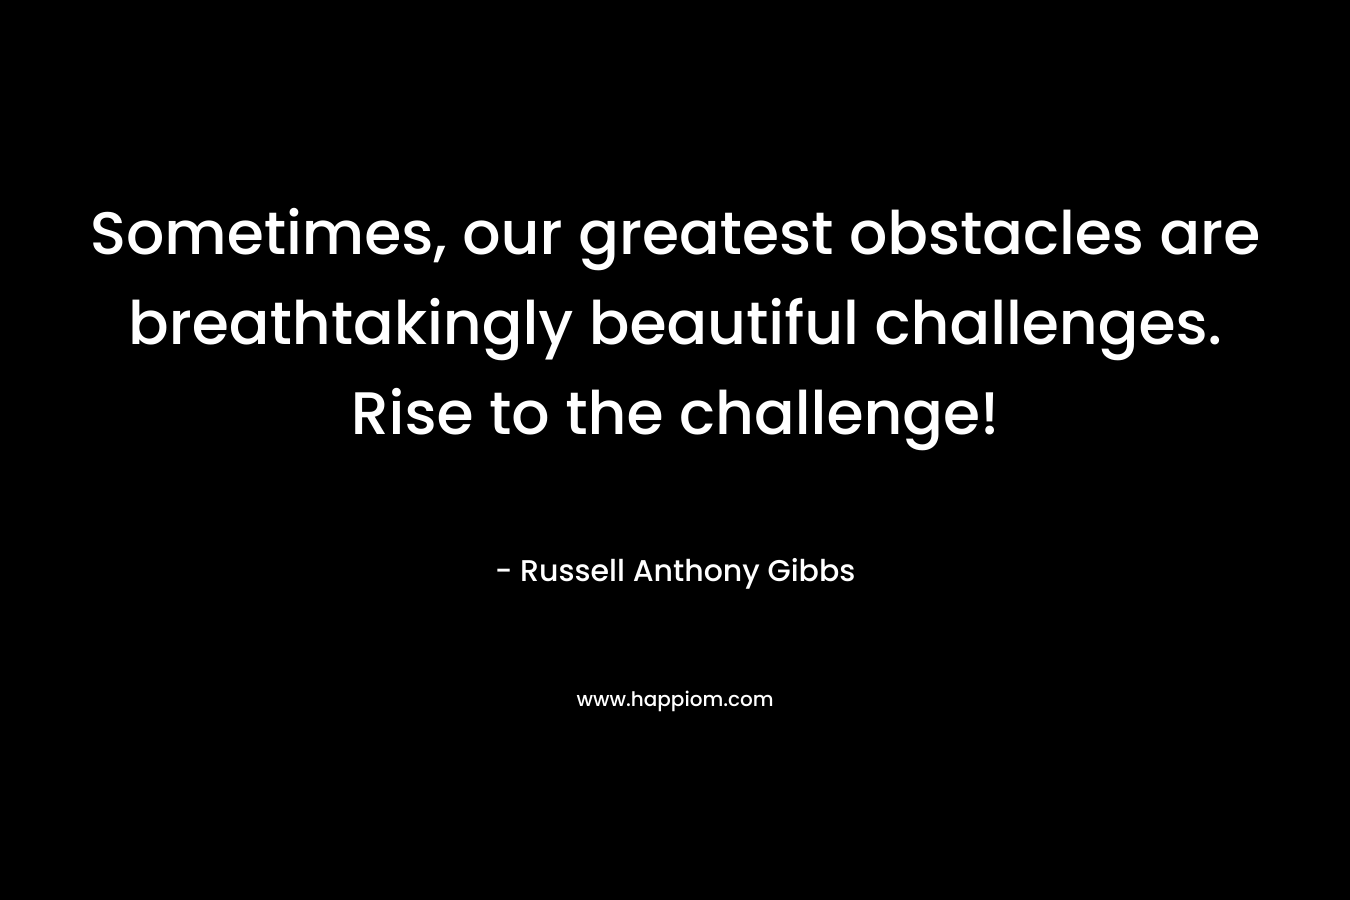 Sometimes, our greatest obstacles are breathtakingly beautiful challenges. Rise to the challenge!